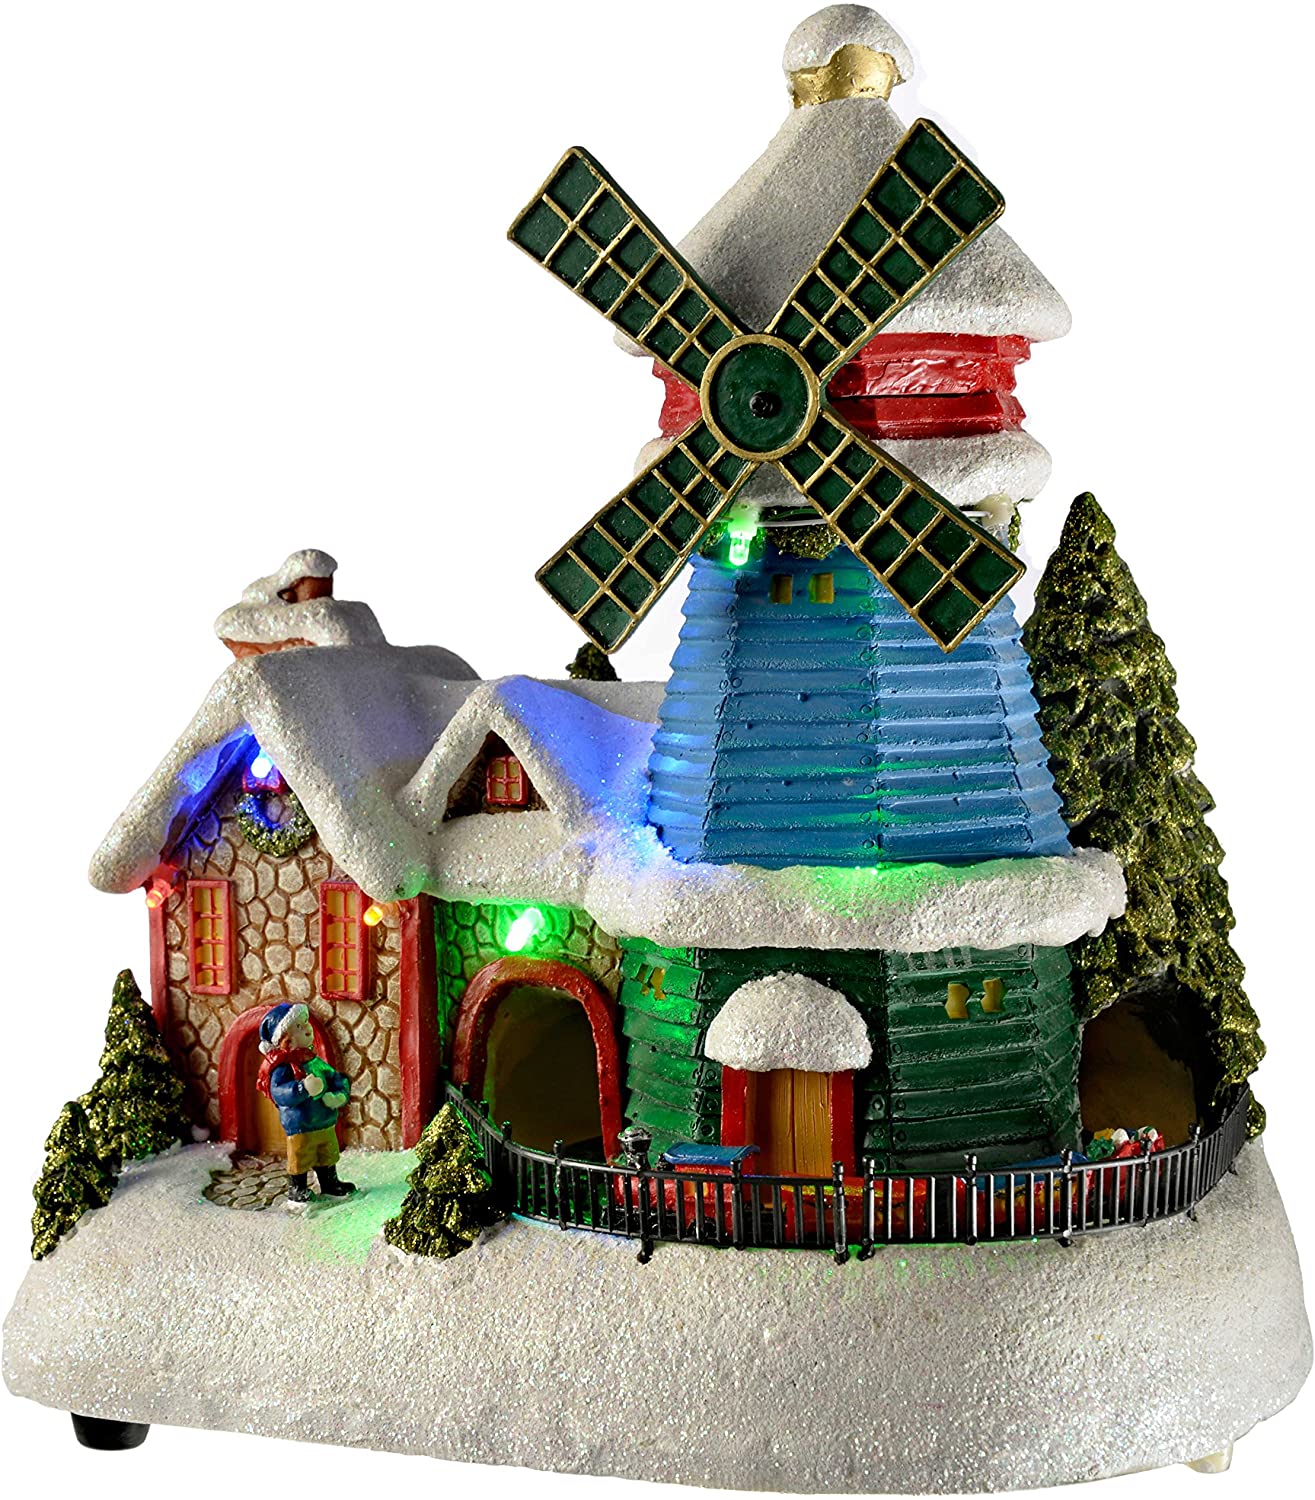 WeRChristmas 50-Piece LED Christmas Windmill House with Rotating Train & Windmill, 23 cm